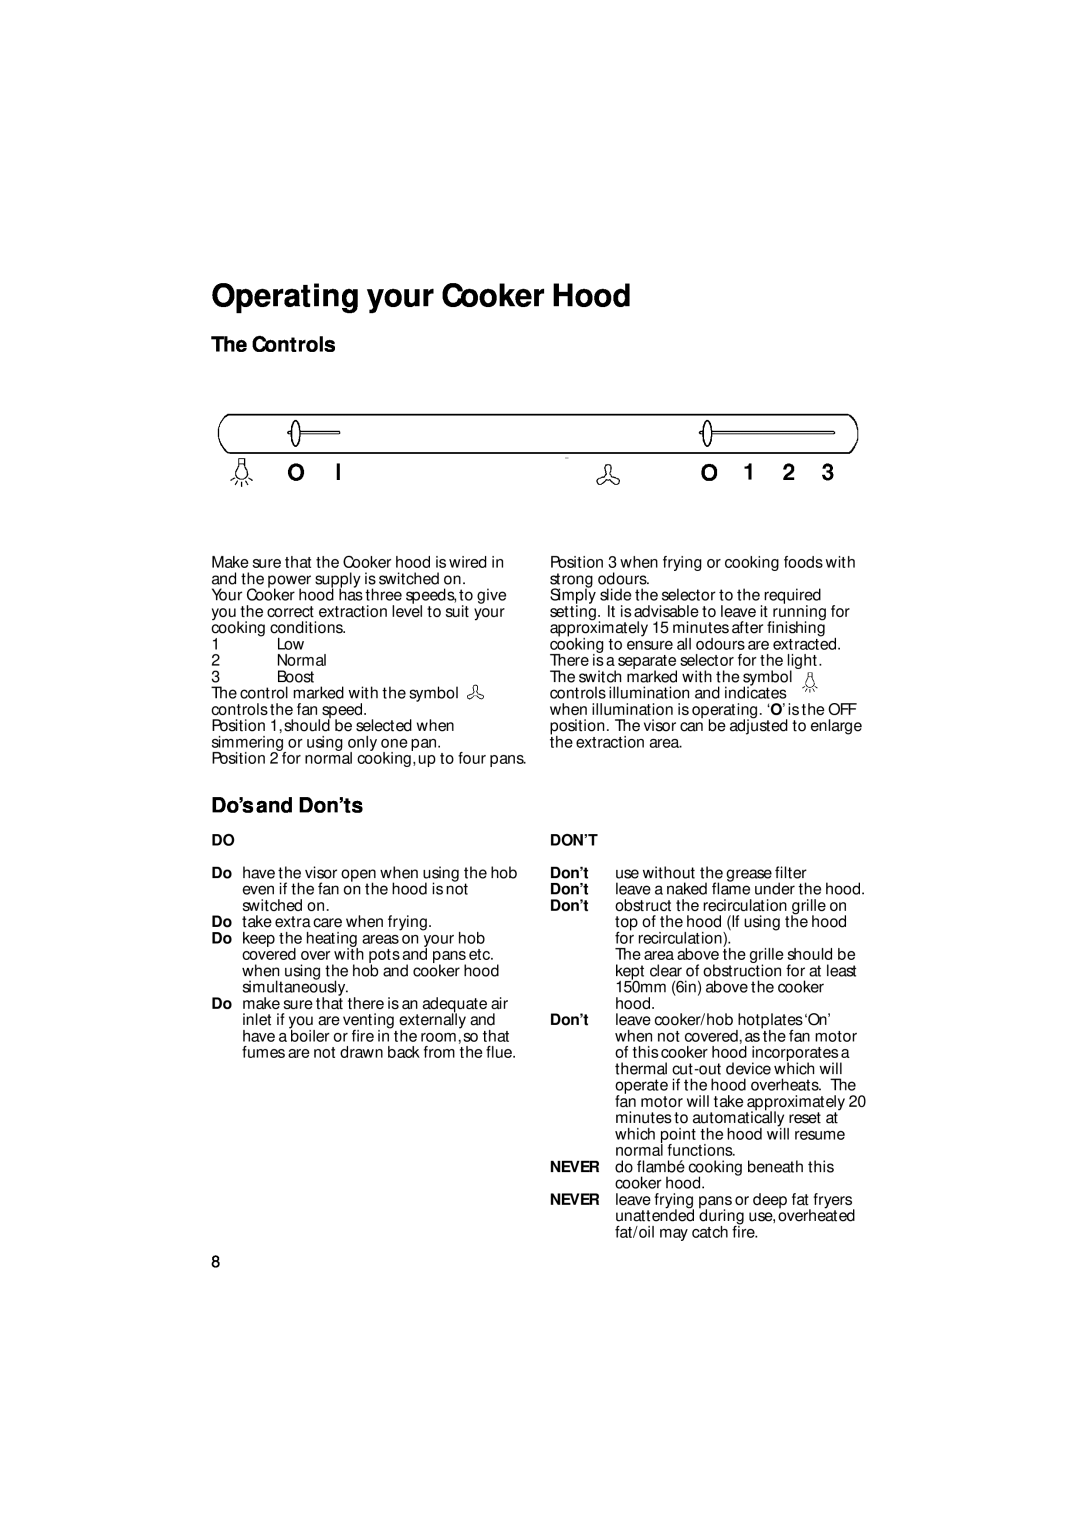 Creda CRV10 manual Operating your Cooker Hood, The Controls, Do’s and Don’ts, Don’T, Never 